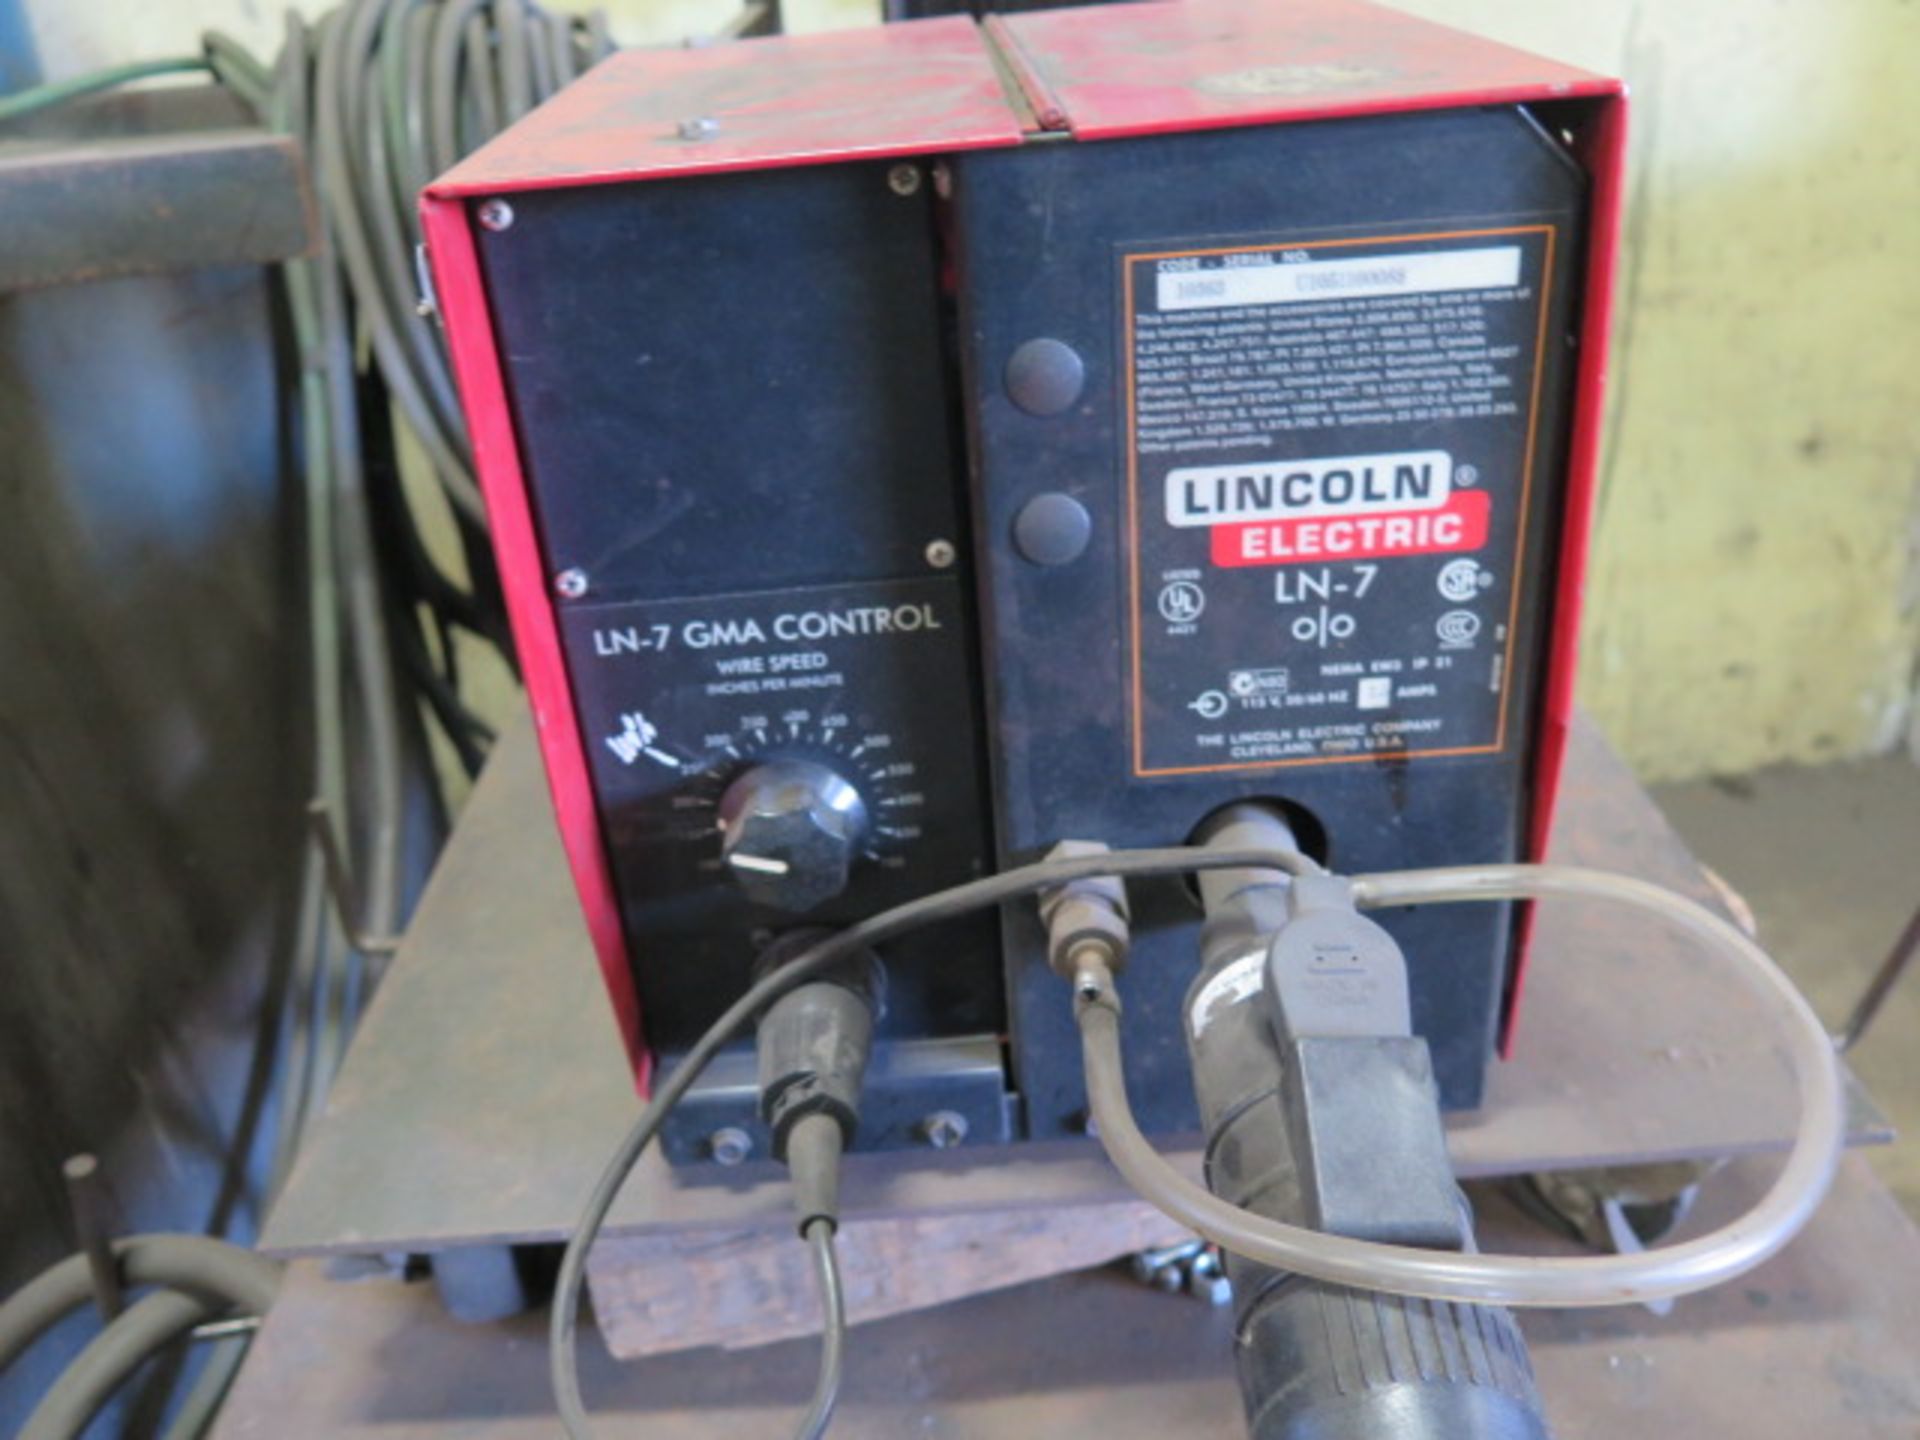 Lincoln DC-400 CV-DC Arc welding Power Source s/n AC599057 w/ Multi-Process Switch, Lincoln LN-7 - Image 4 of 7